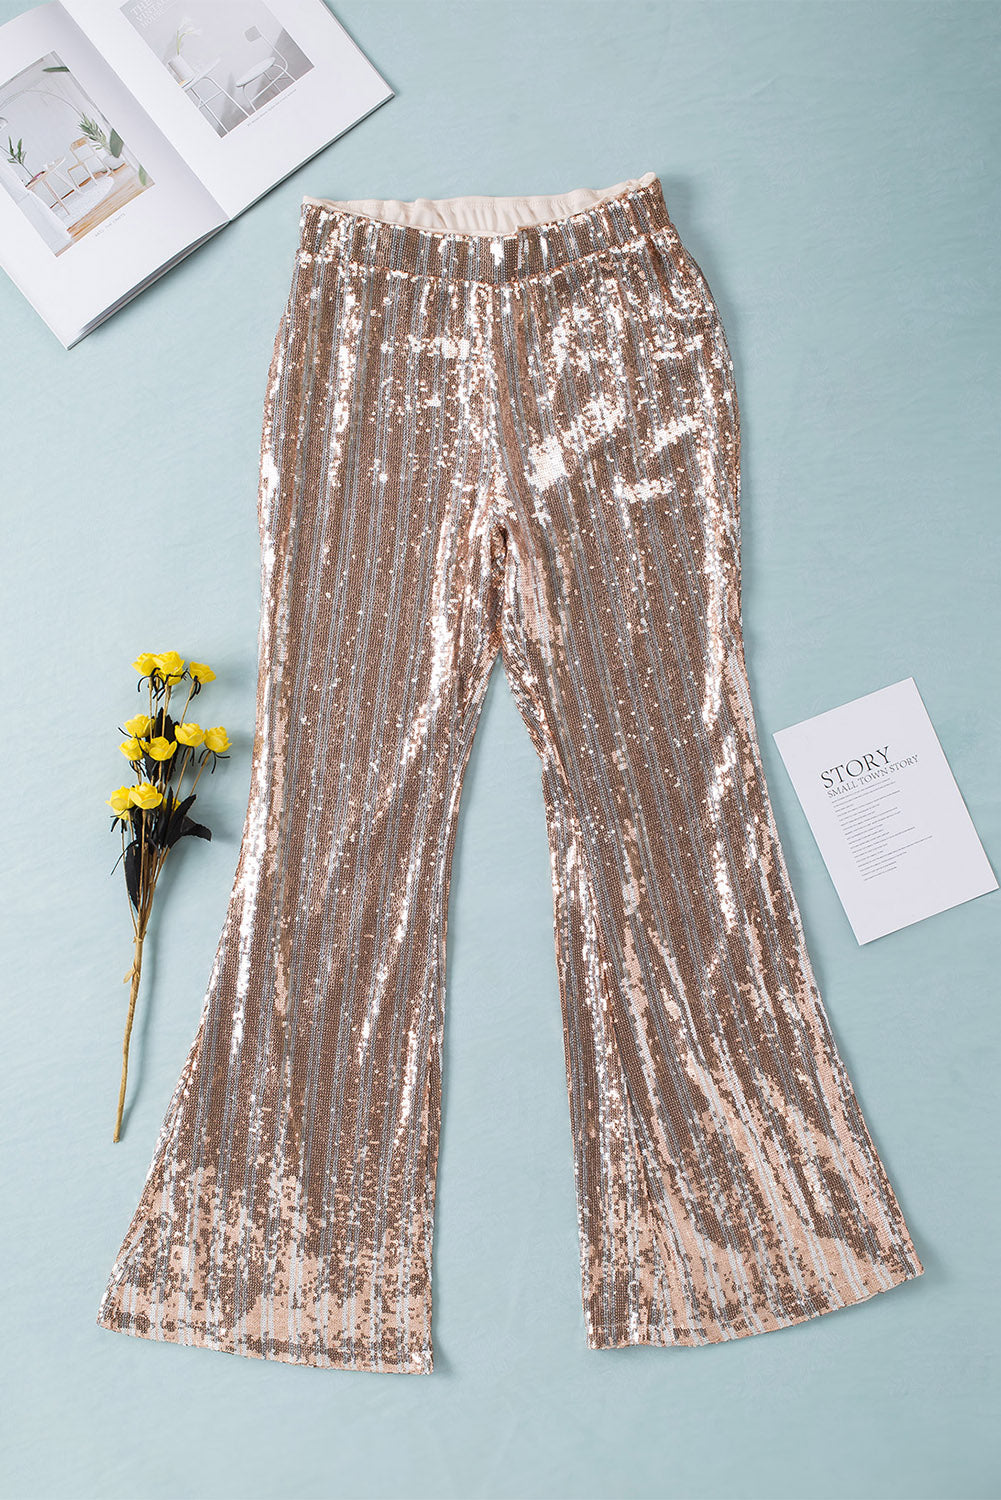 LC77253-18-S, LC77253-18-M, LC77253-18-L, LC77253-18-XL, LC77253-18-2XL, Apricot Sequin Stripe High Waist Flare Pants